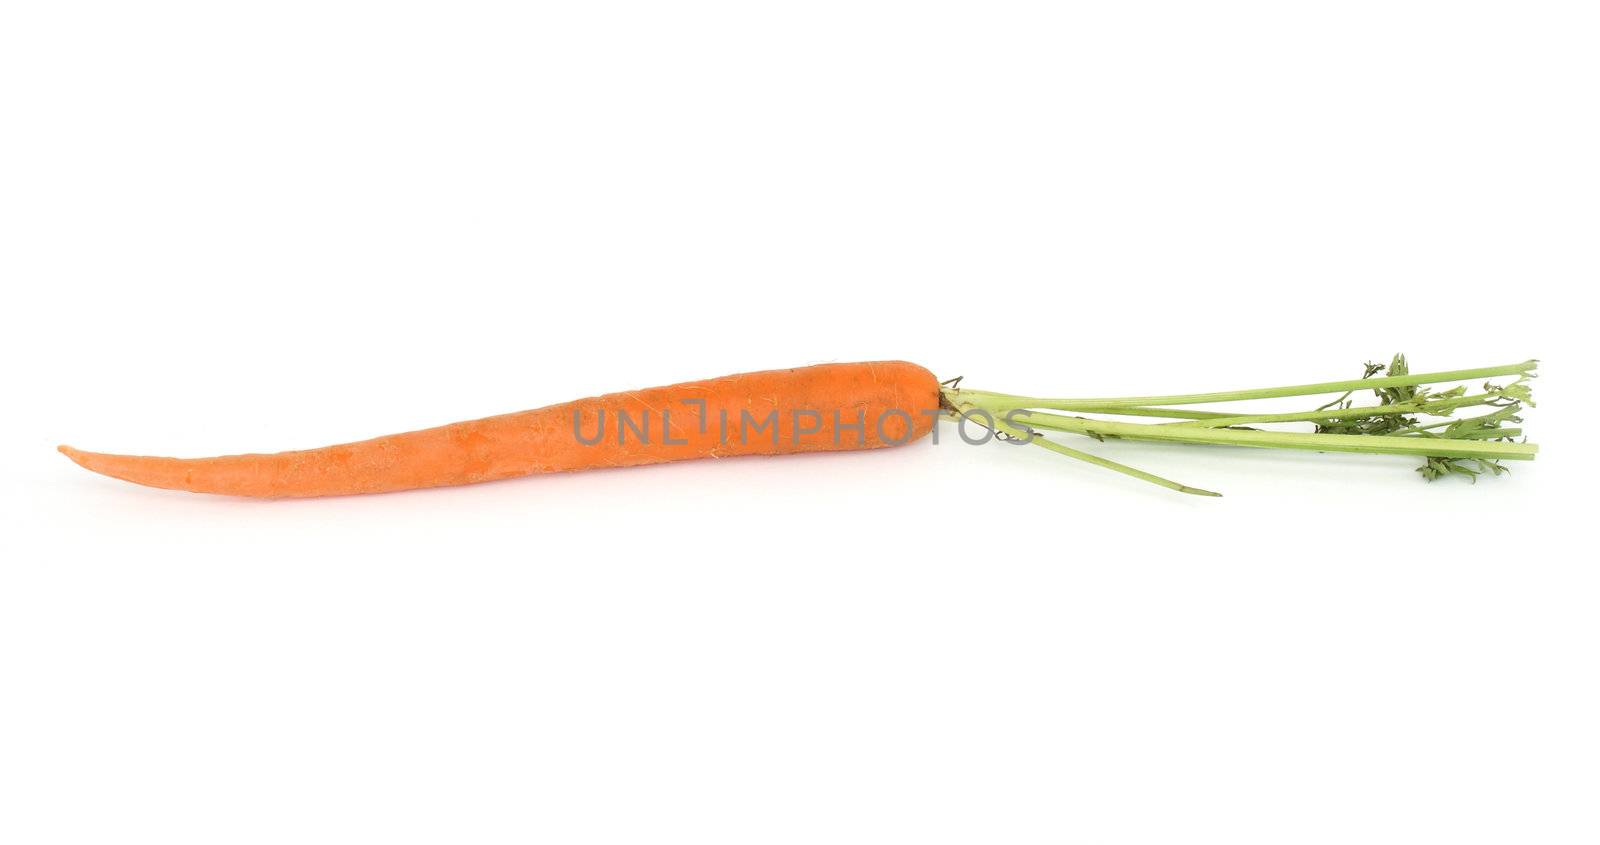 A fresh carrot isolated on white background.